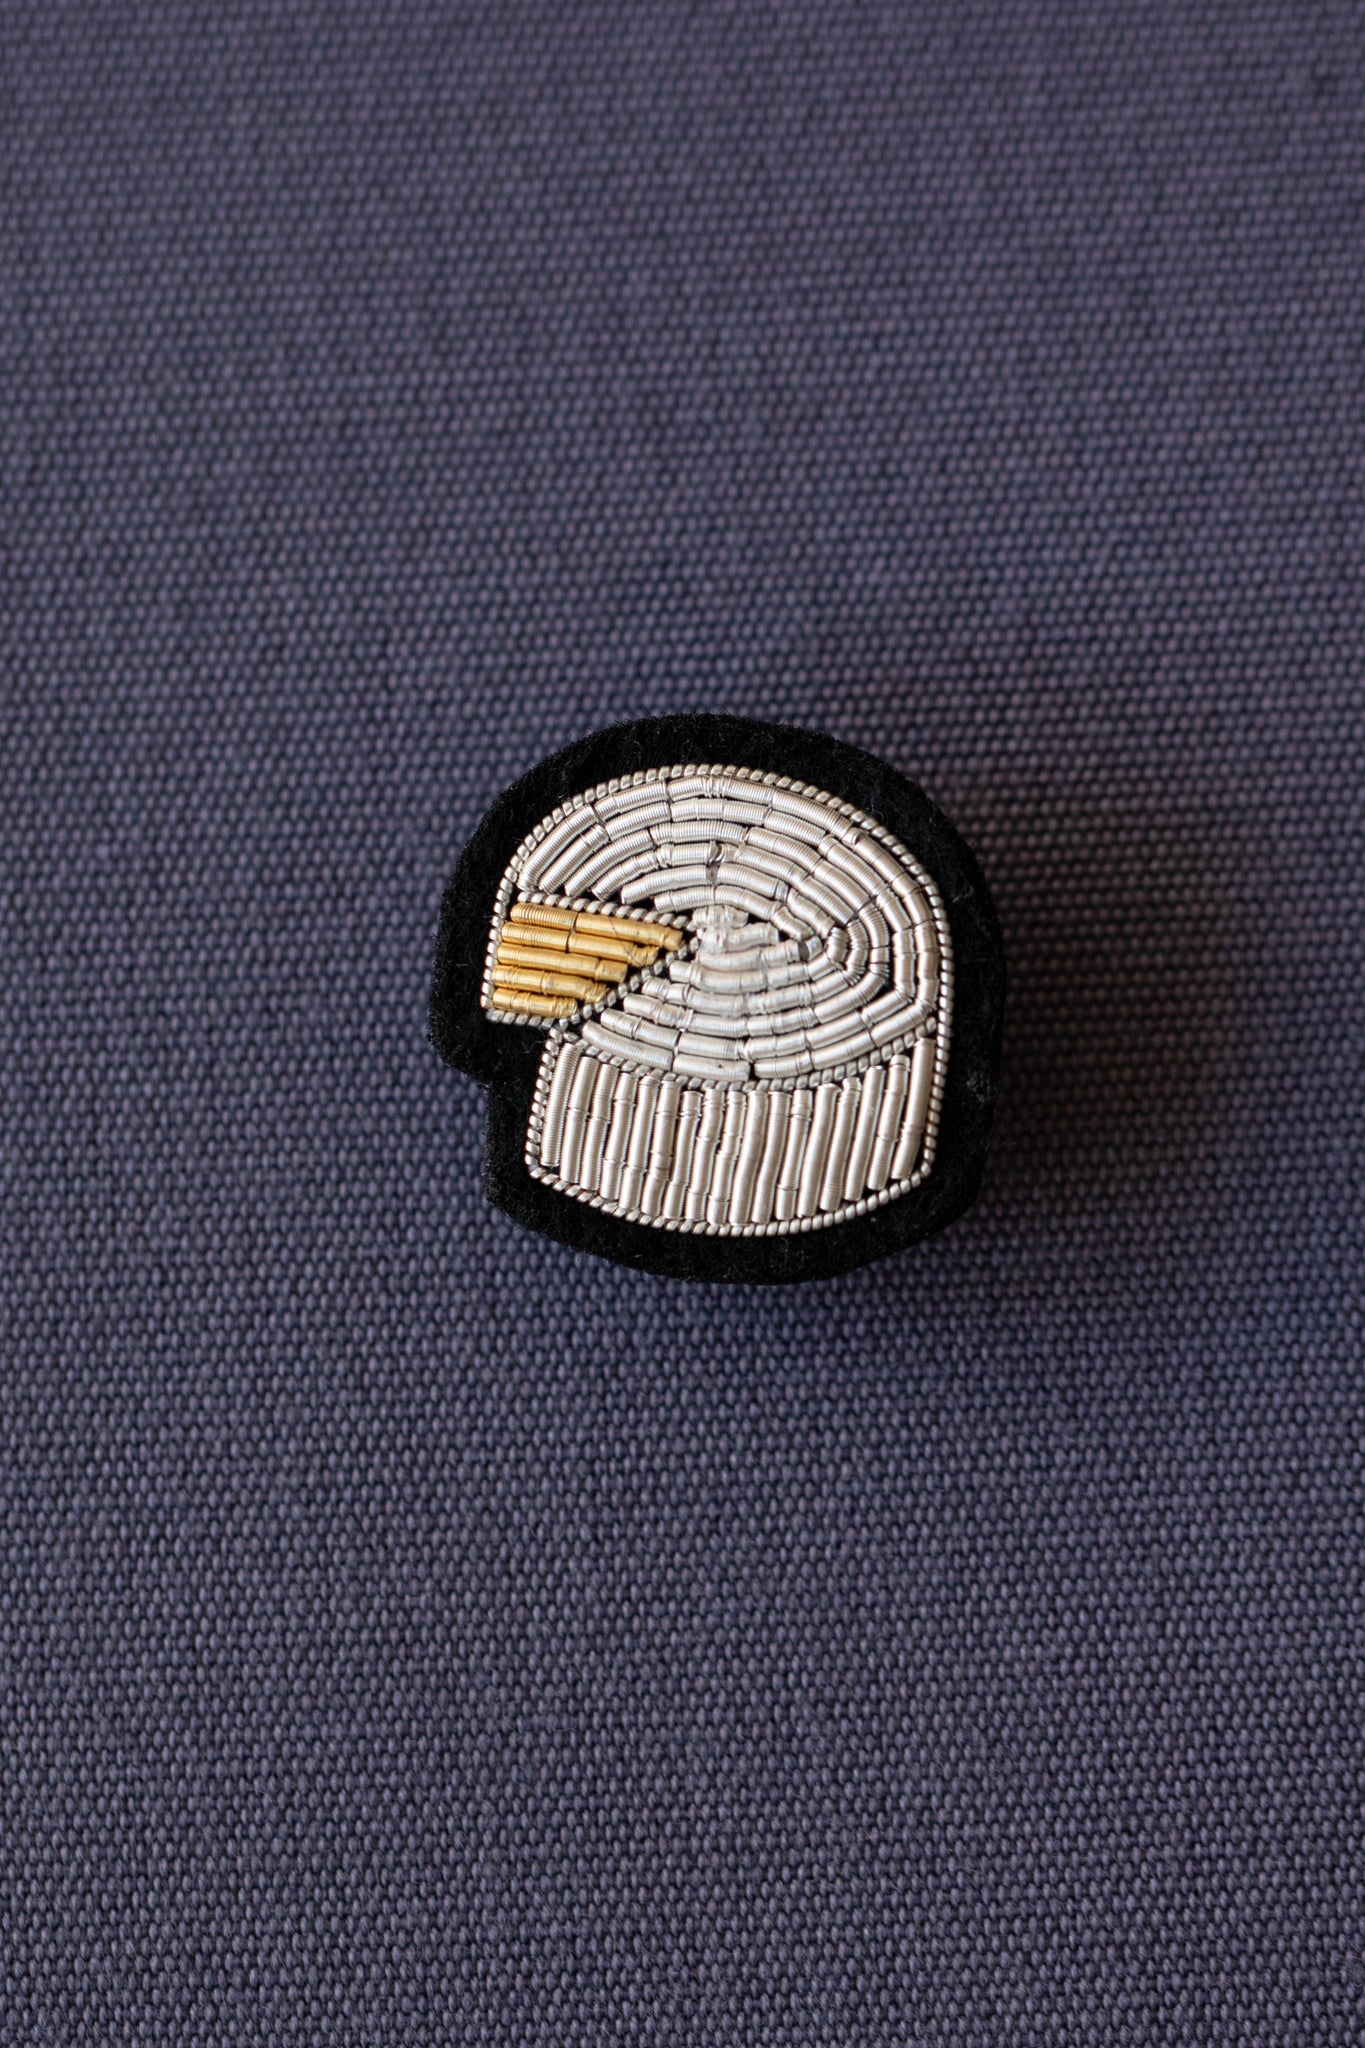 Embroidered Pins- Foods